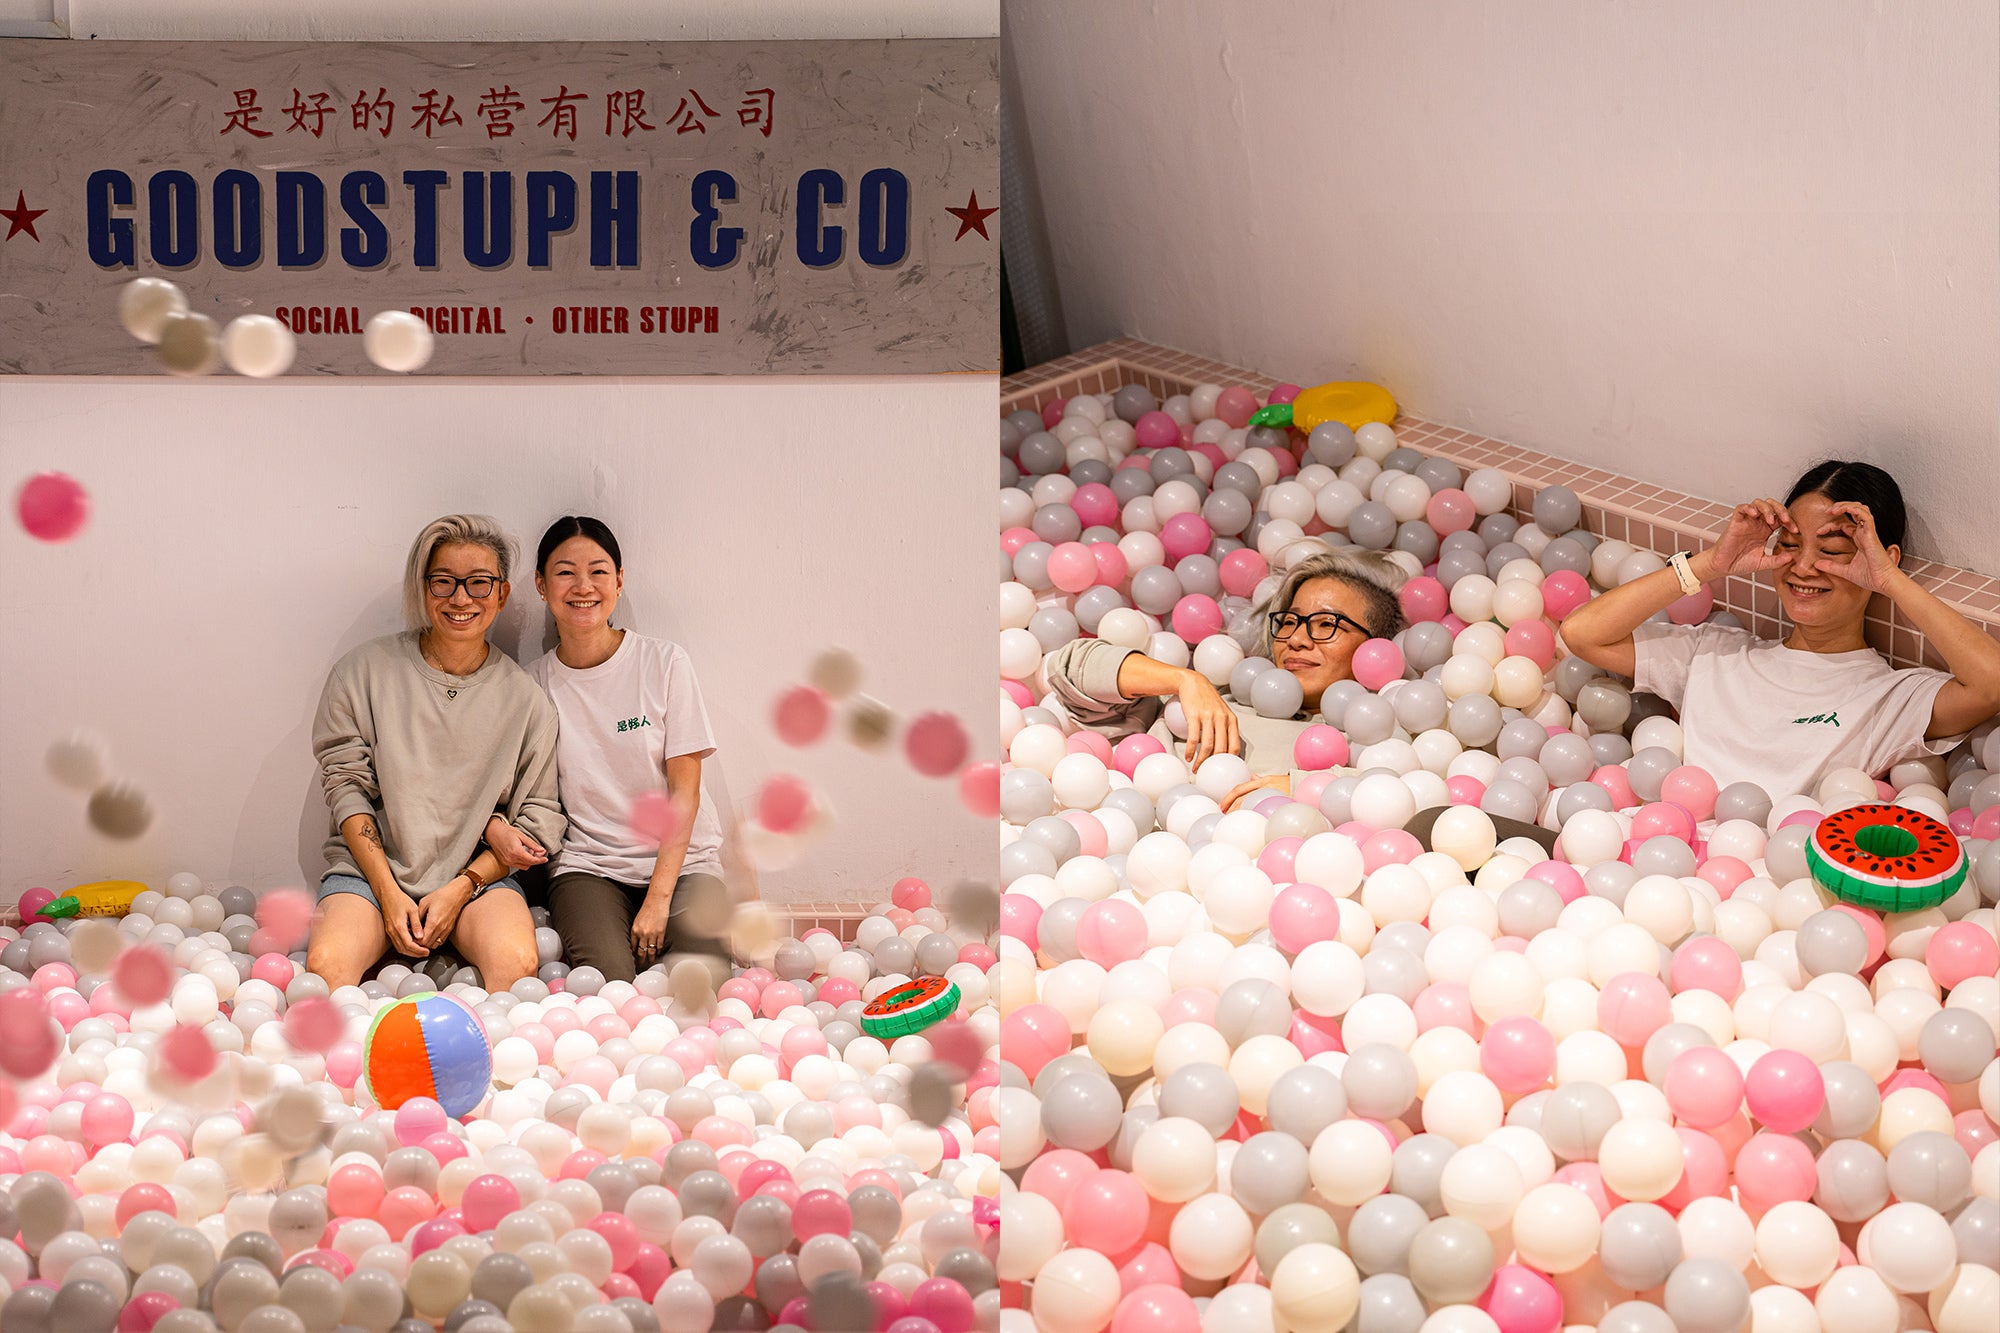 Pat and Claudia in Goodstuph's ballpit